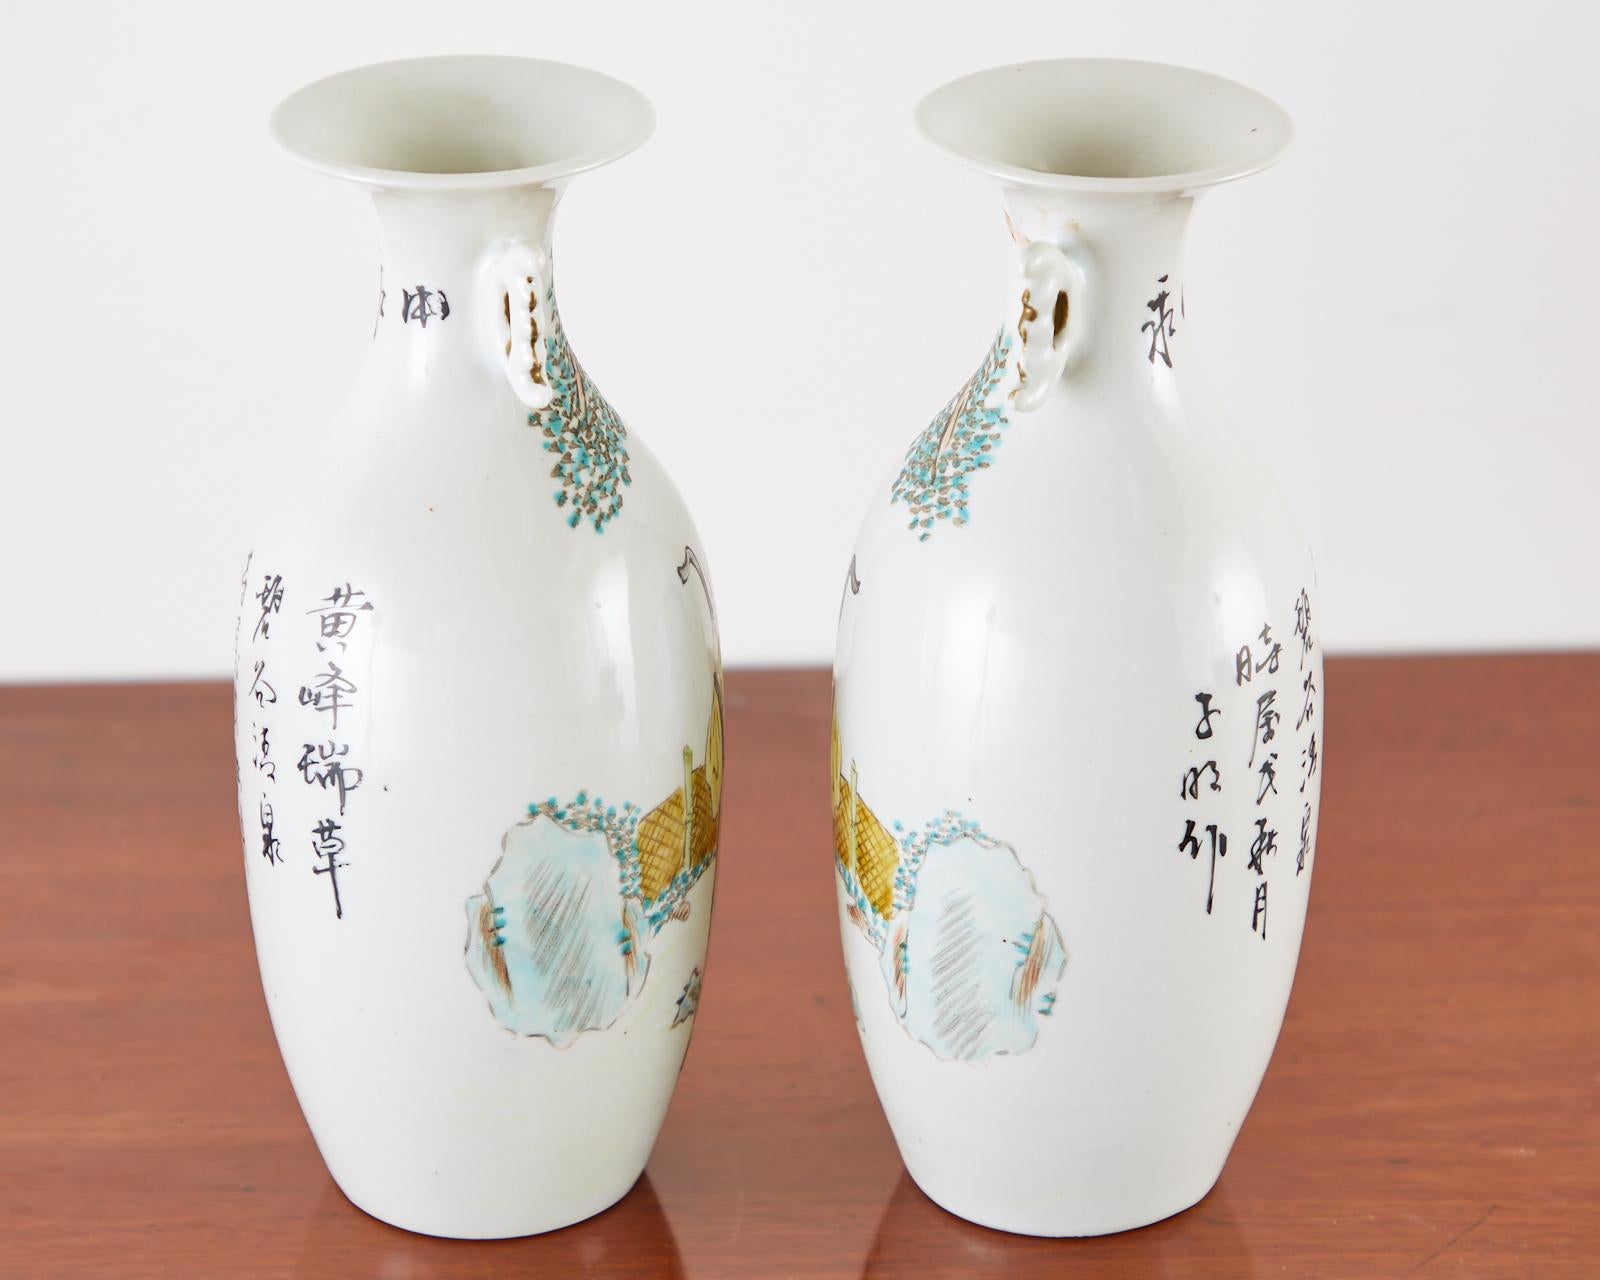 Pair of Diminutive Chinese Porcelain Fencai Vases In Good Condition For Sale In Rio Vista, CA